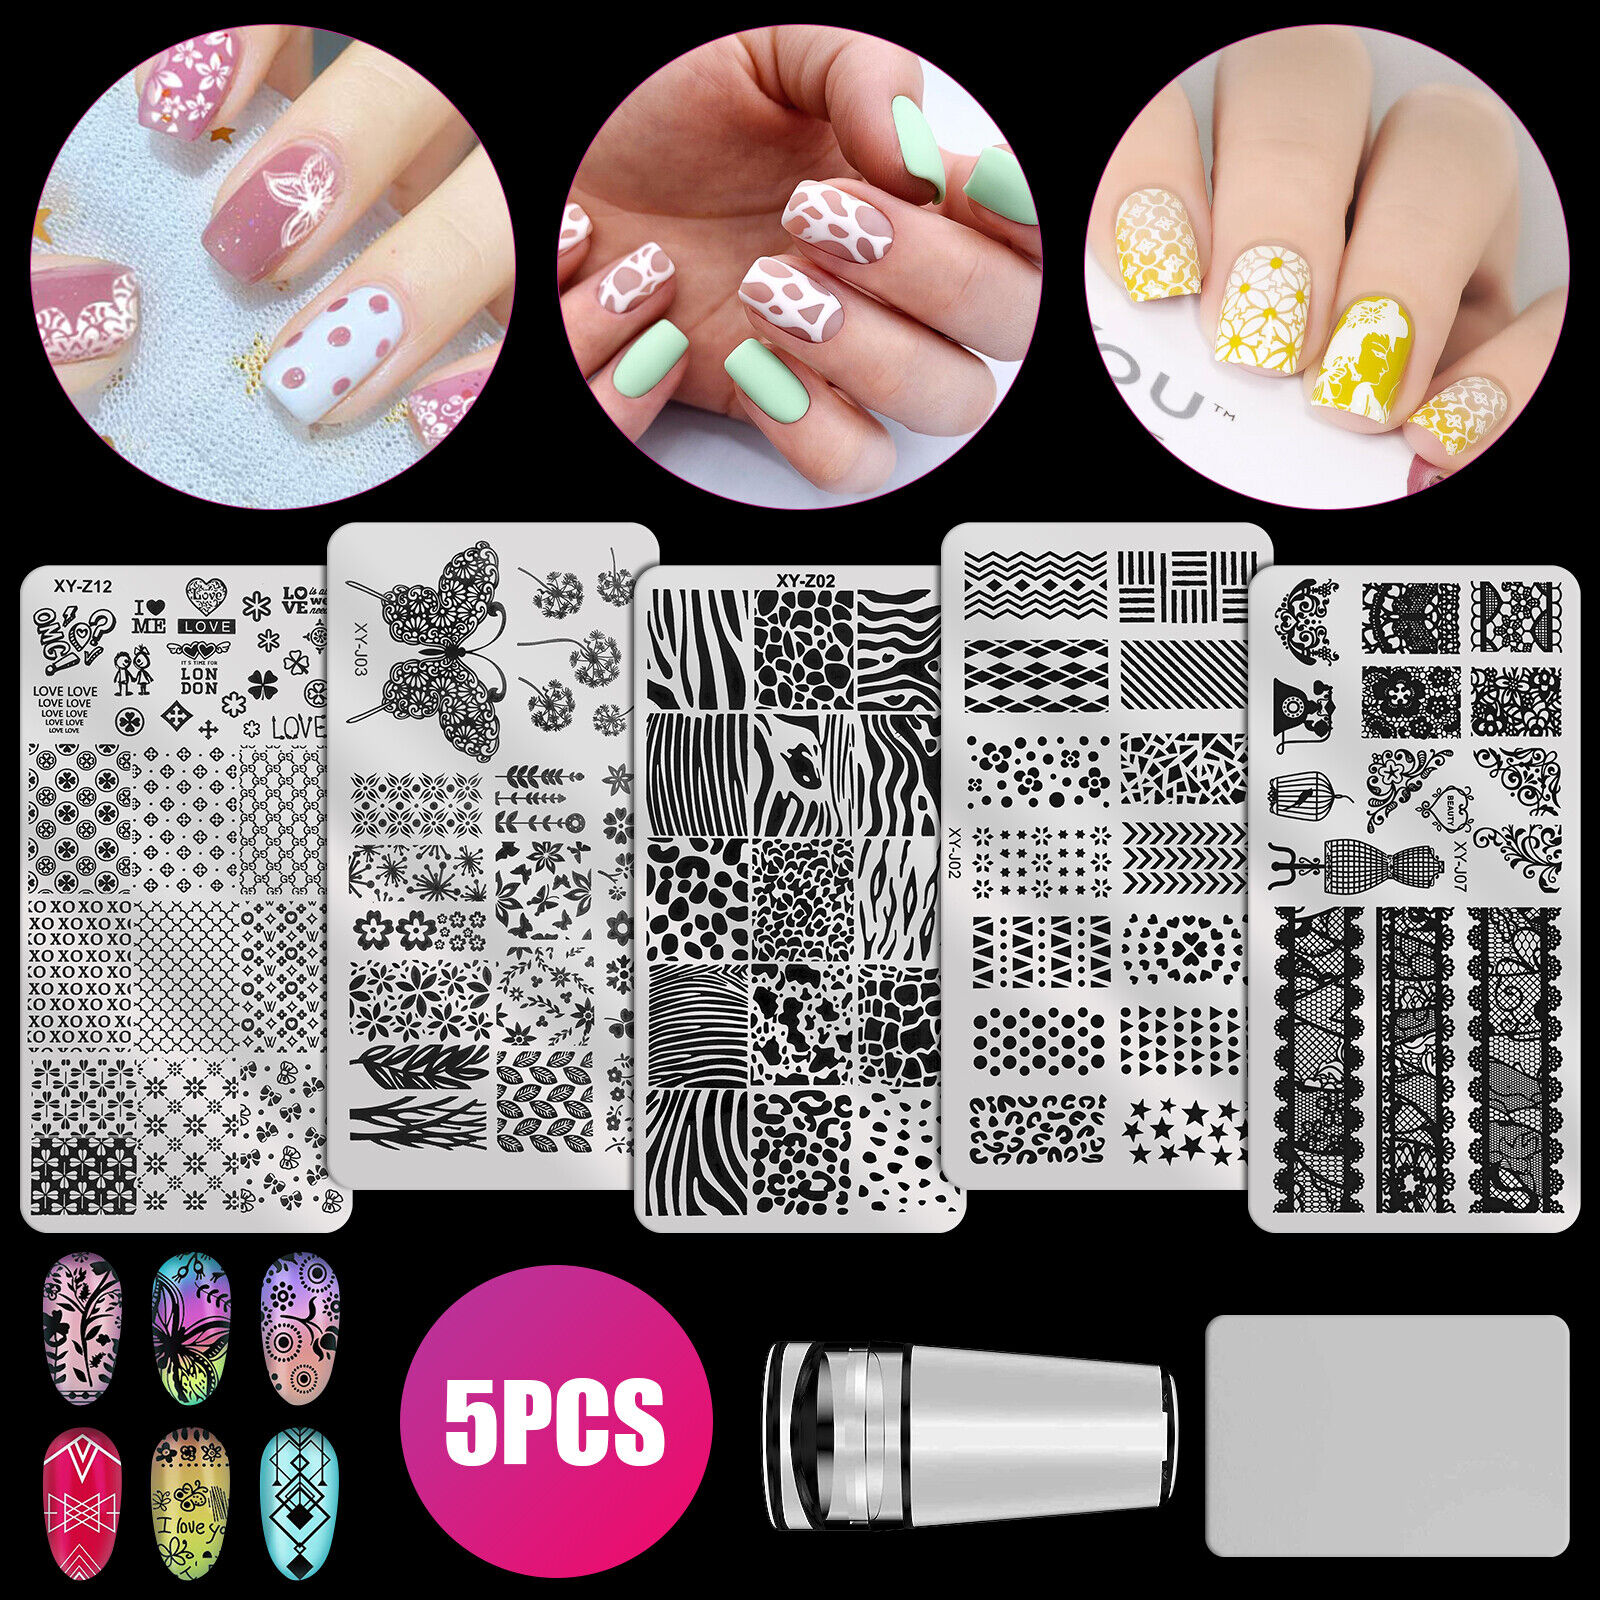 Great Choice Products 7Pcs Nail Art Template Stamping Plate Clear Stamper Scraper Kit Diy Printing Set